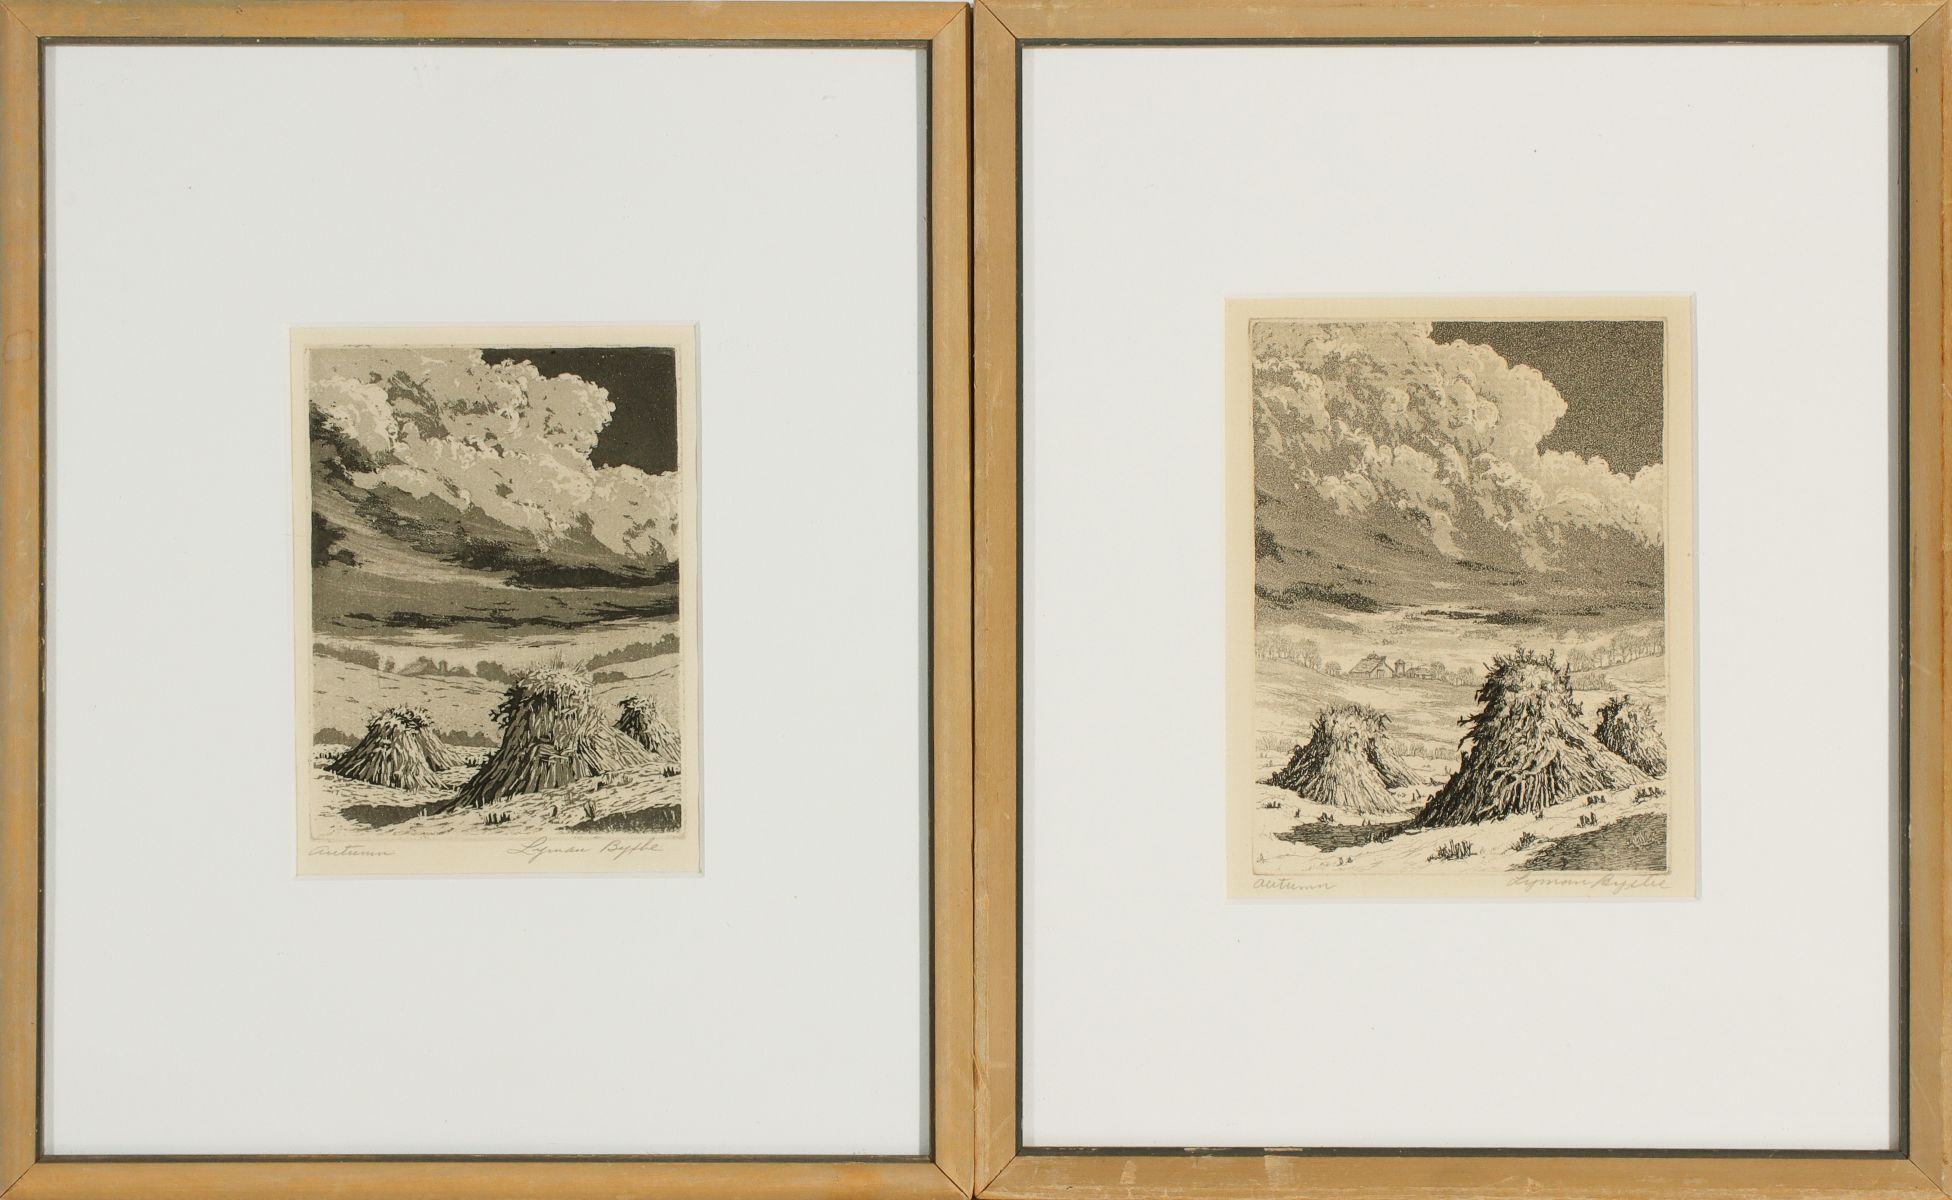 TWO VERSIONS OF THE LYMAN BYXBE AQUATINT 'AUTUMN'